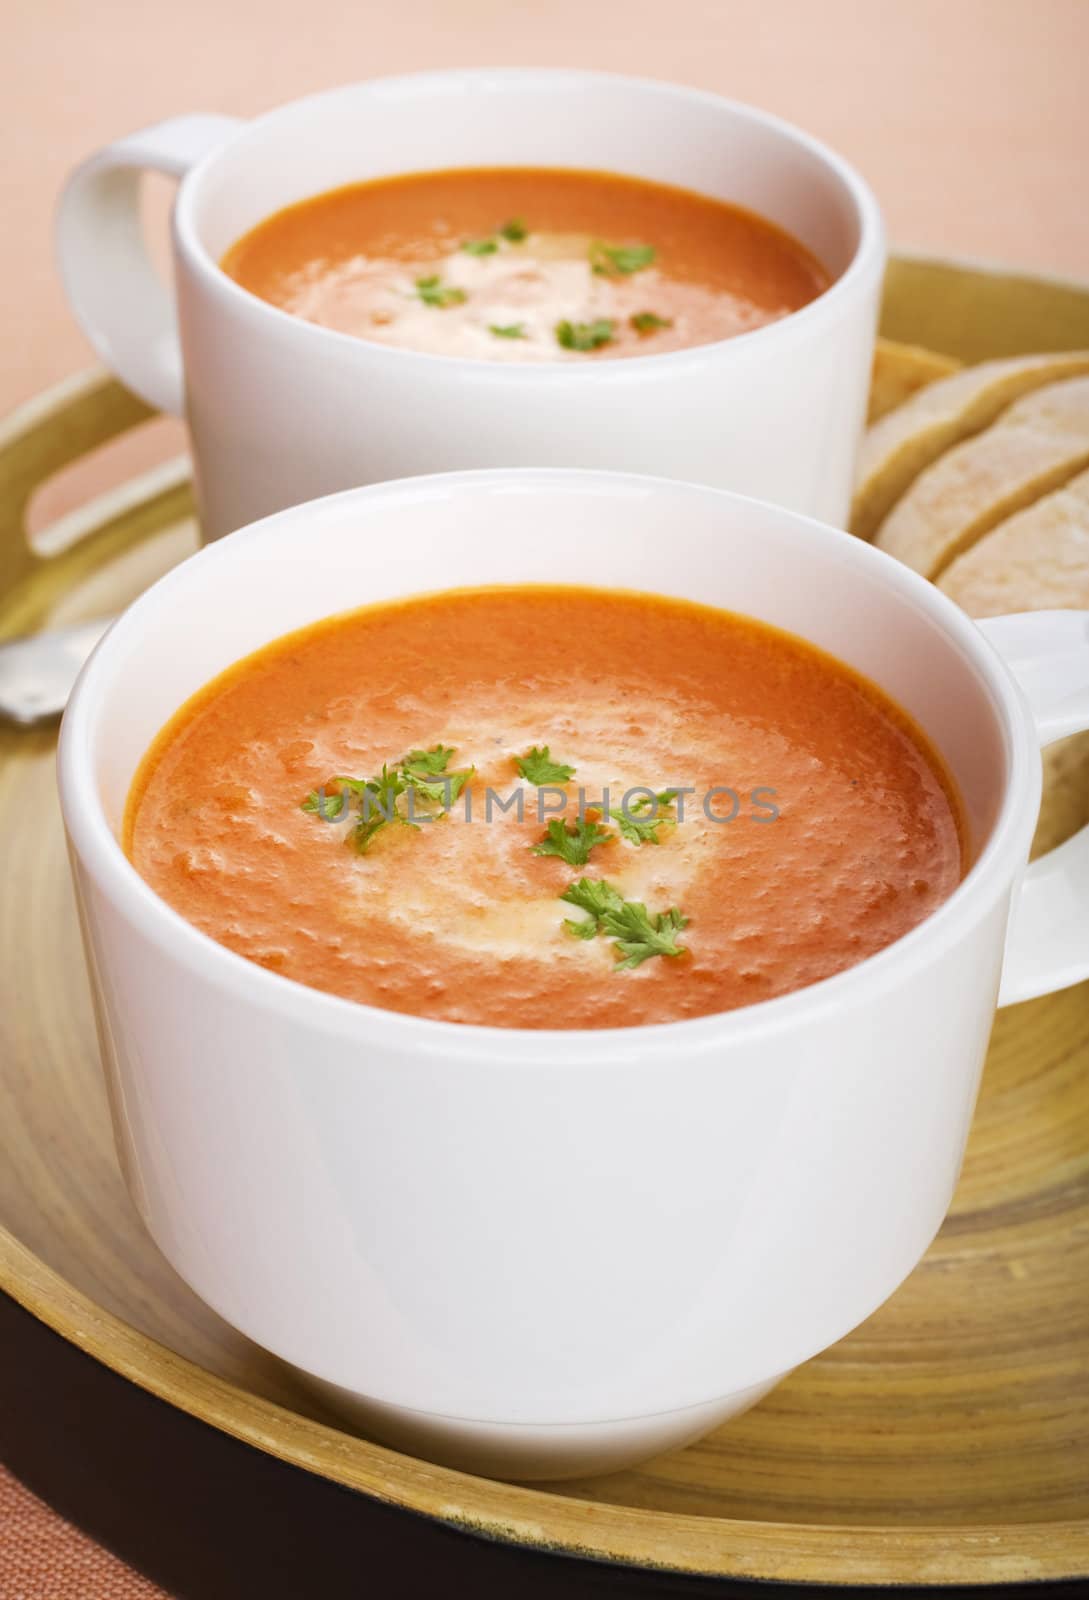 Two Mugs of Tomato Soup on a Tray by Travelling-light